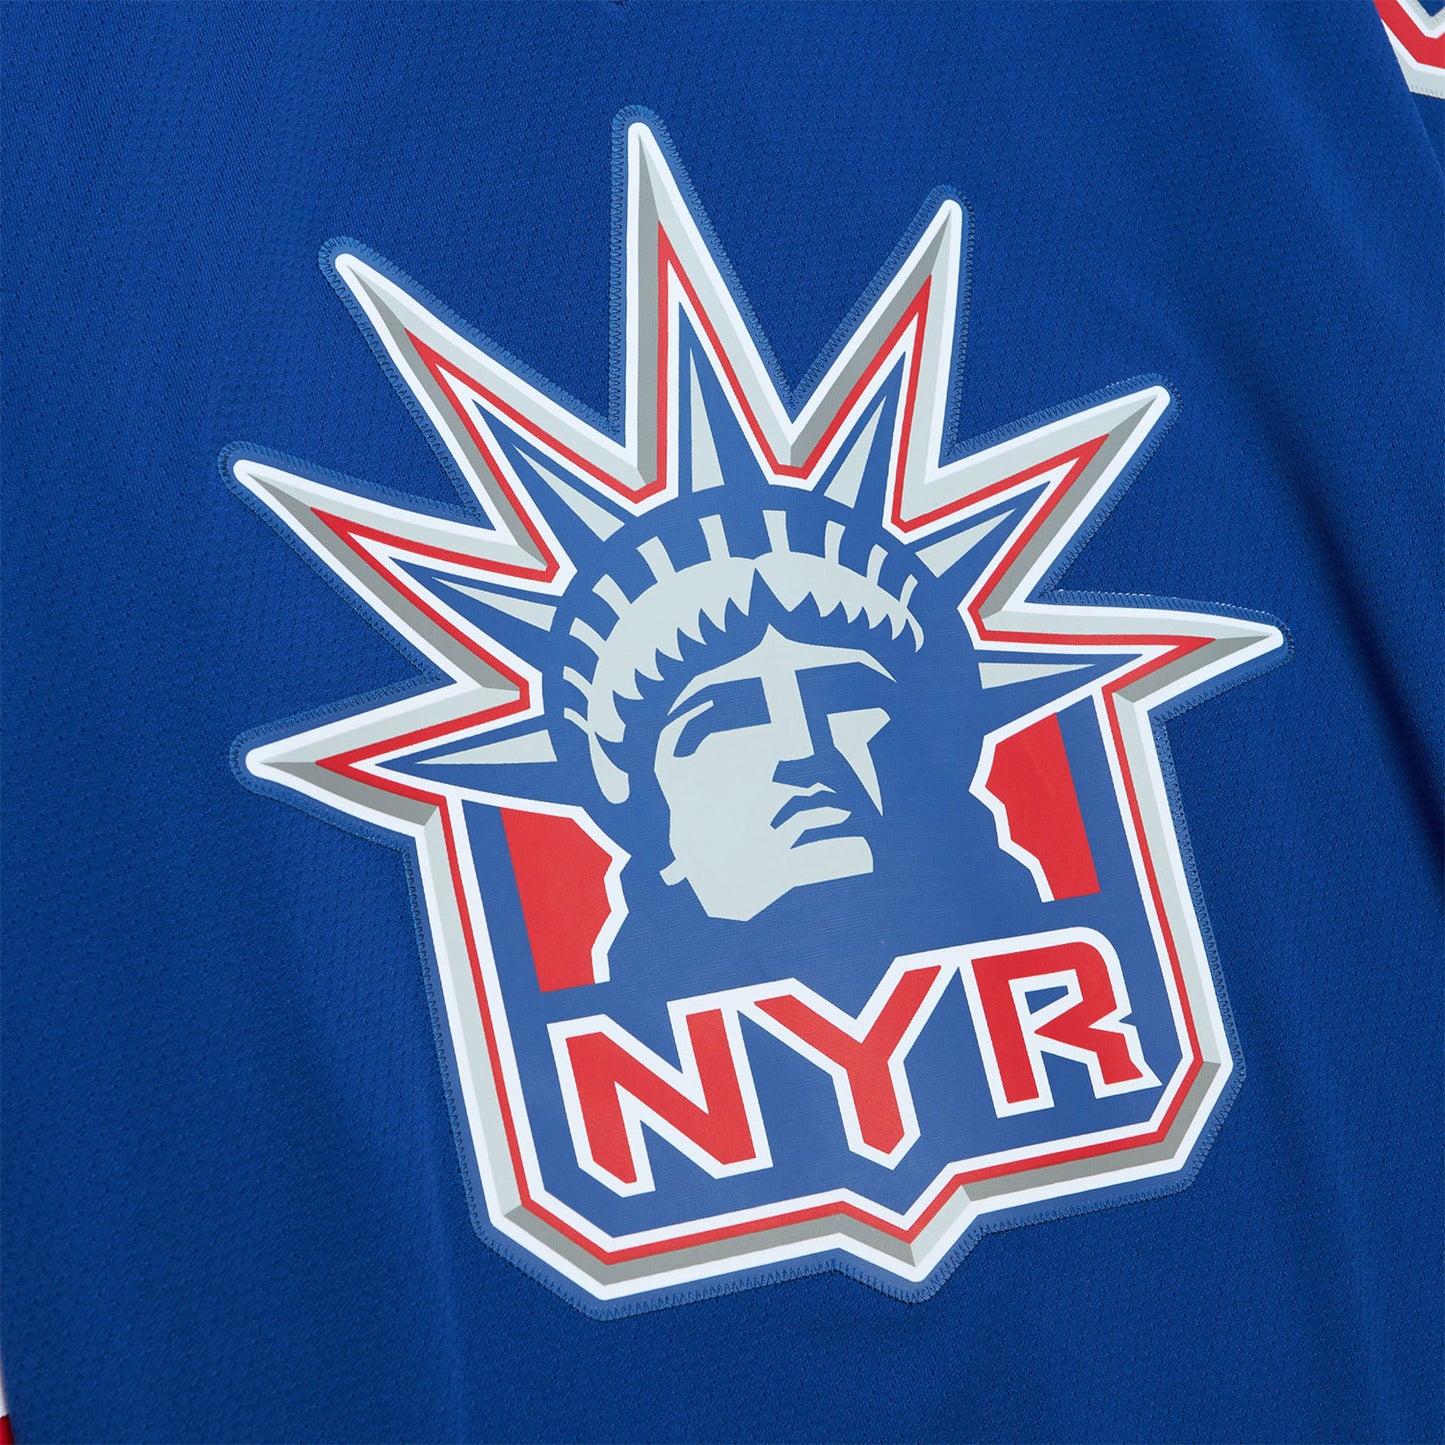 Mitchell & Ness Rangers Wayne Gretzky 1996 Alternate Jersey In Blue - Zoom View On Front Graphic